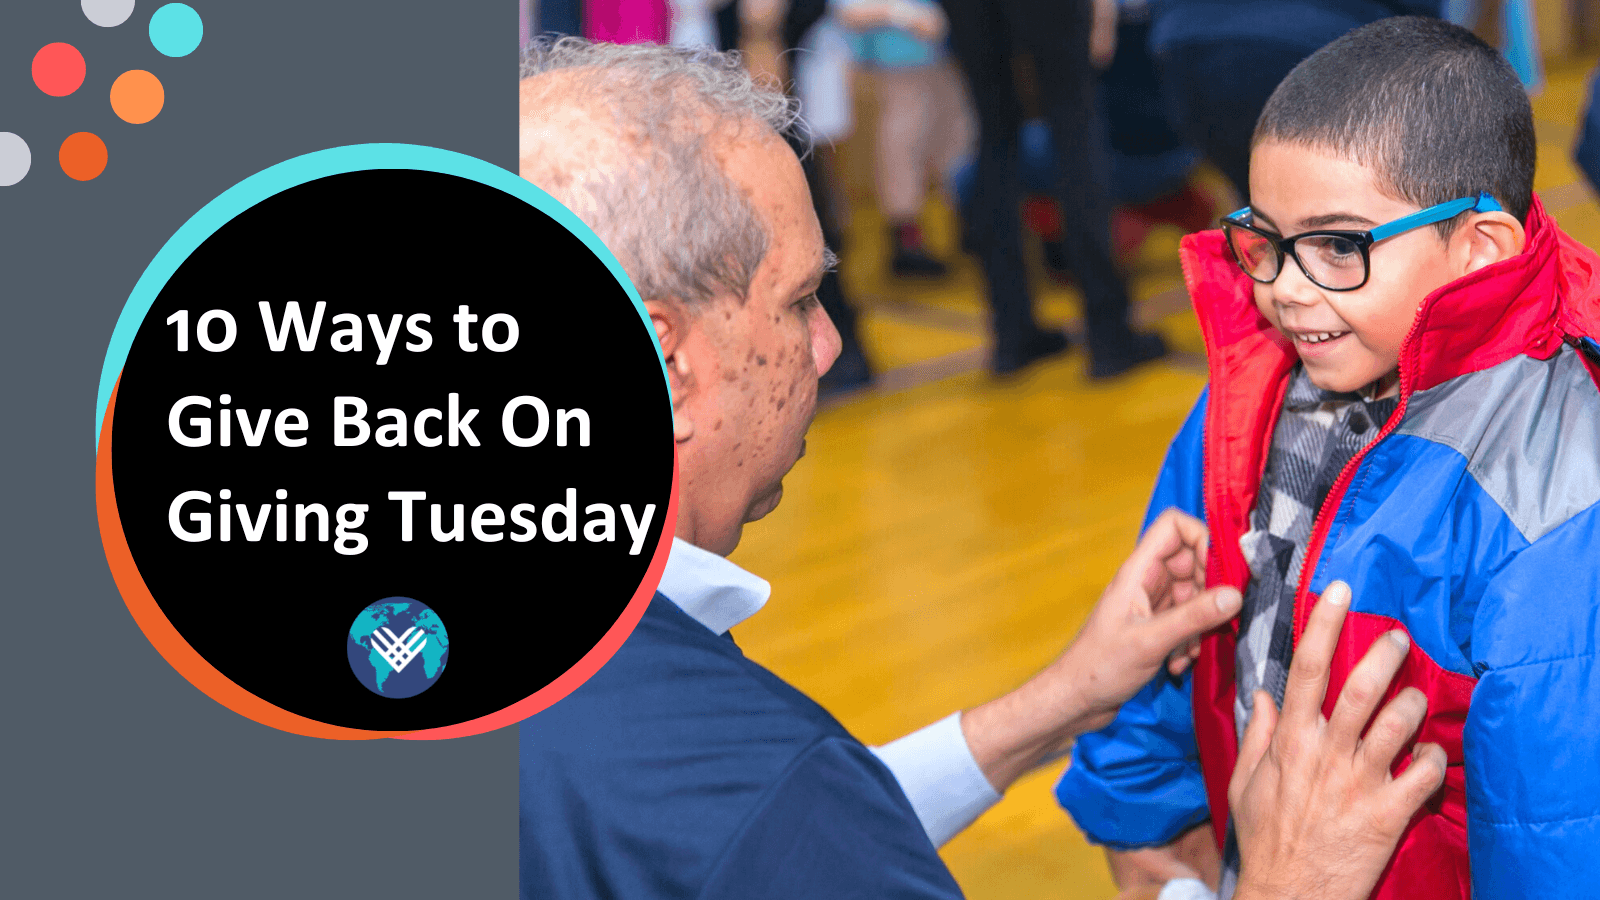 10 Ways to Give Back on Giving Tuesday